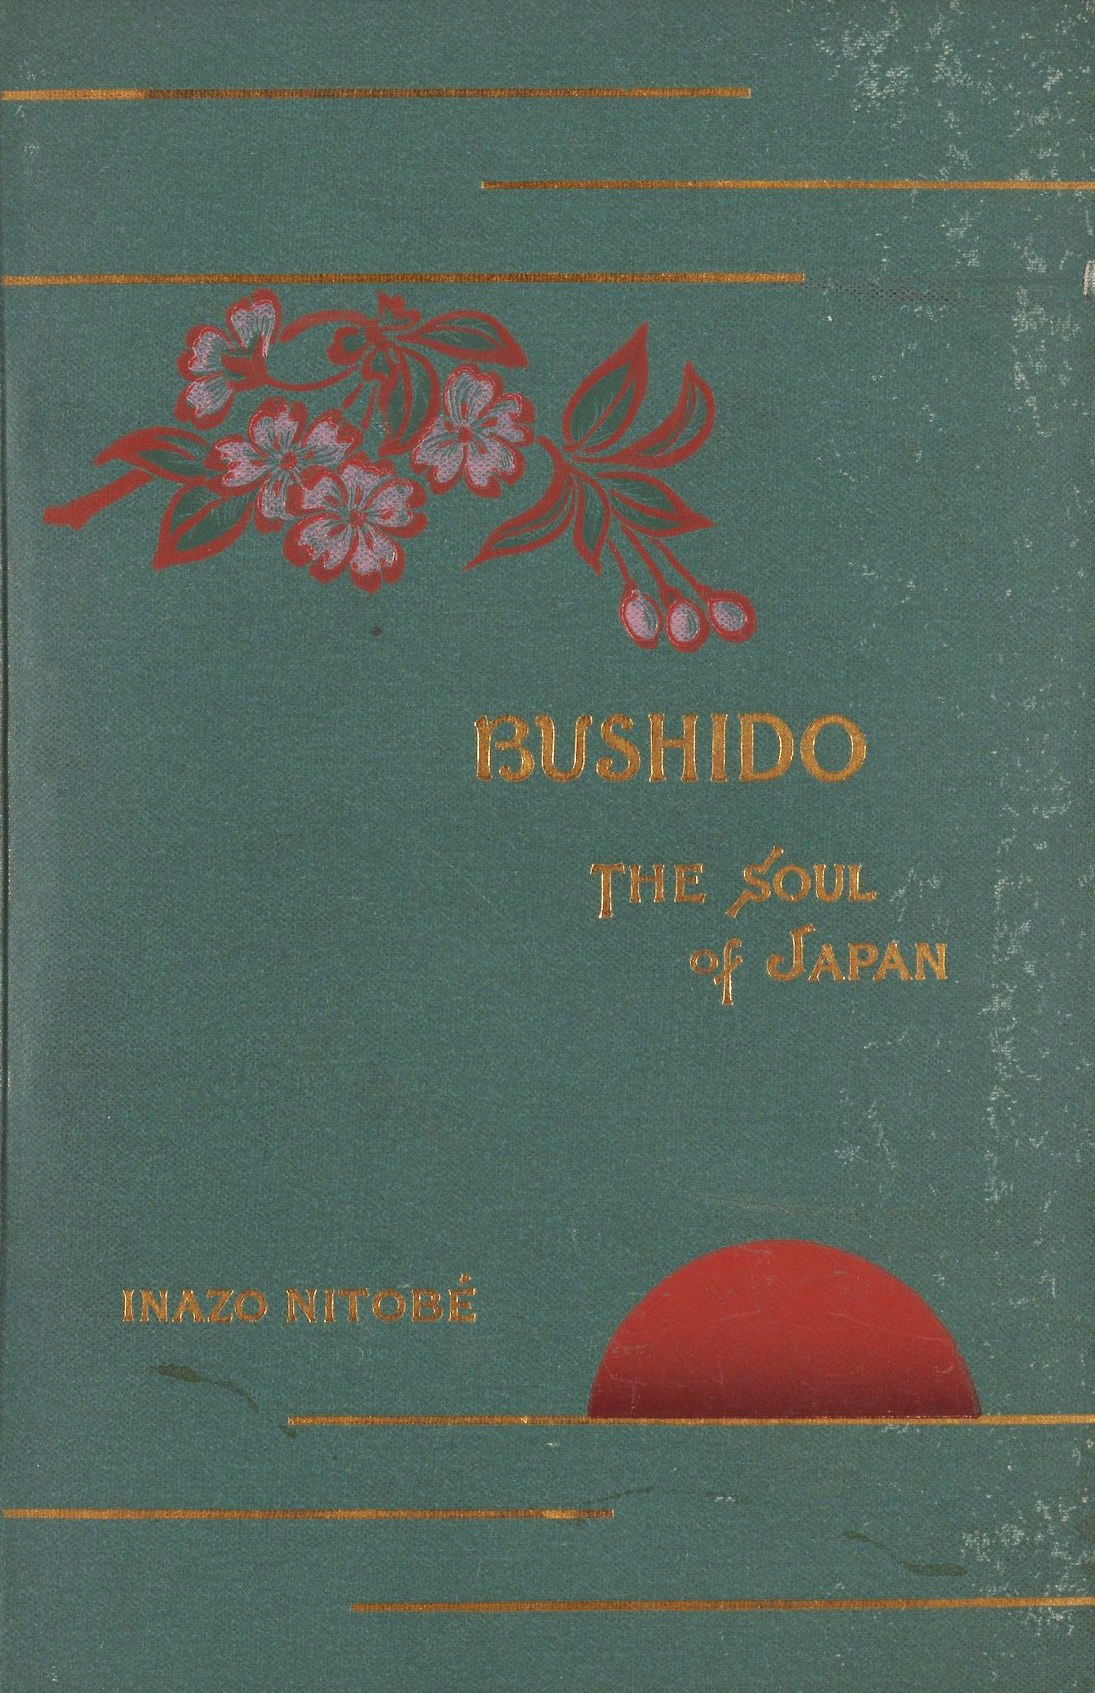 Vintage book cover of 